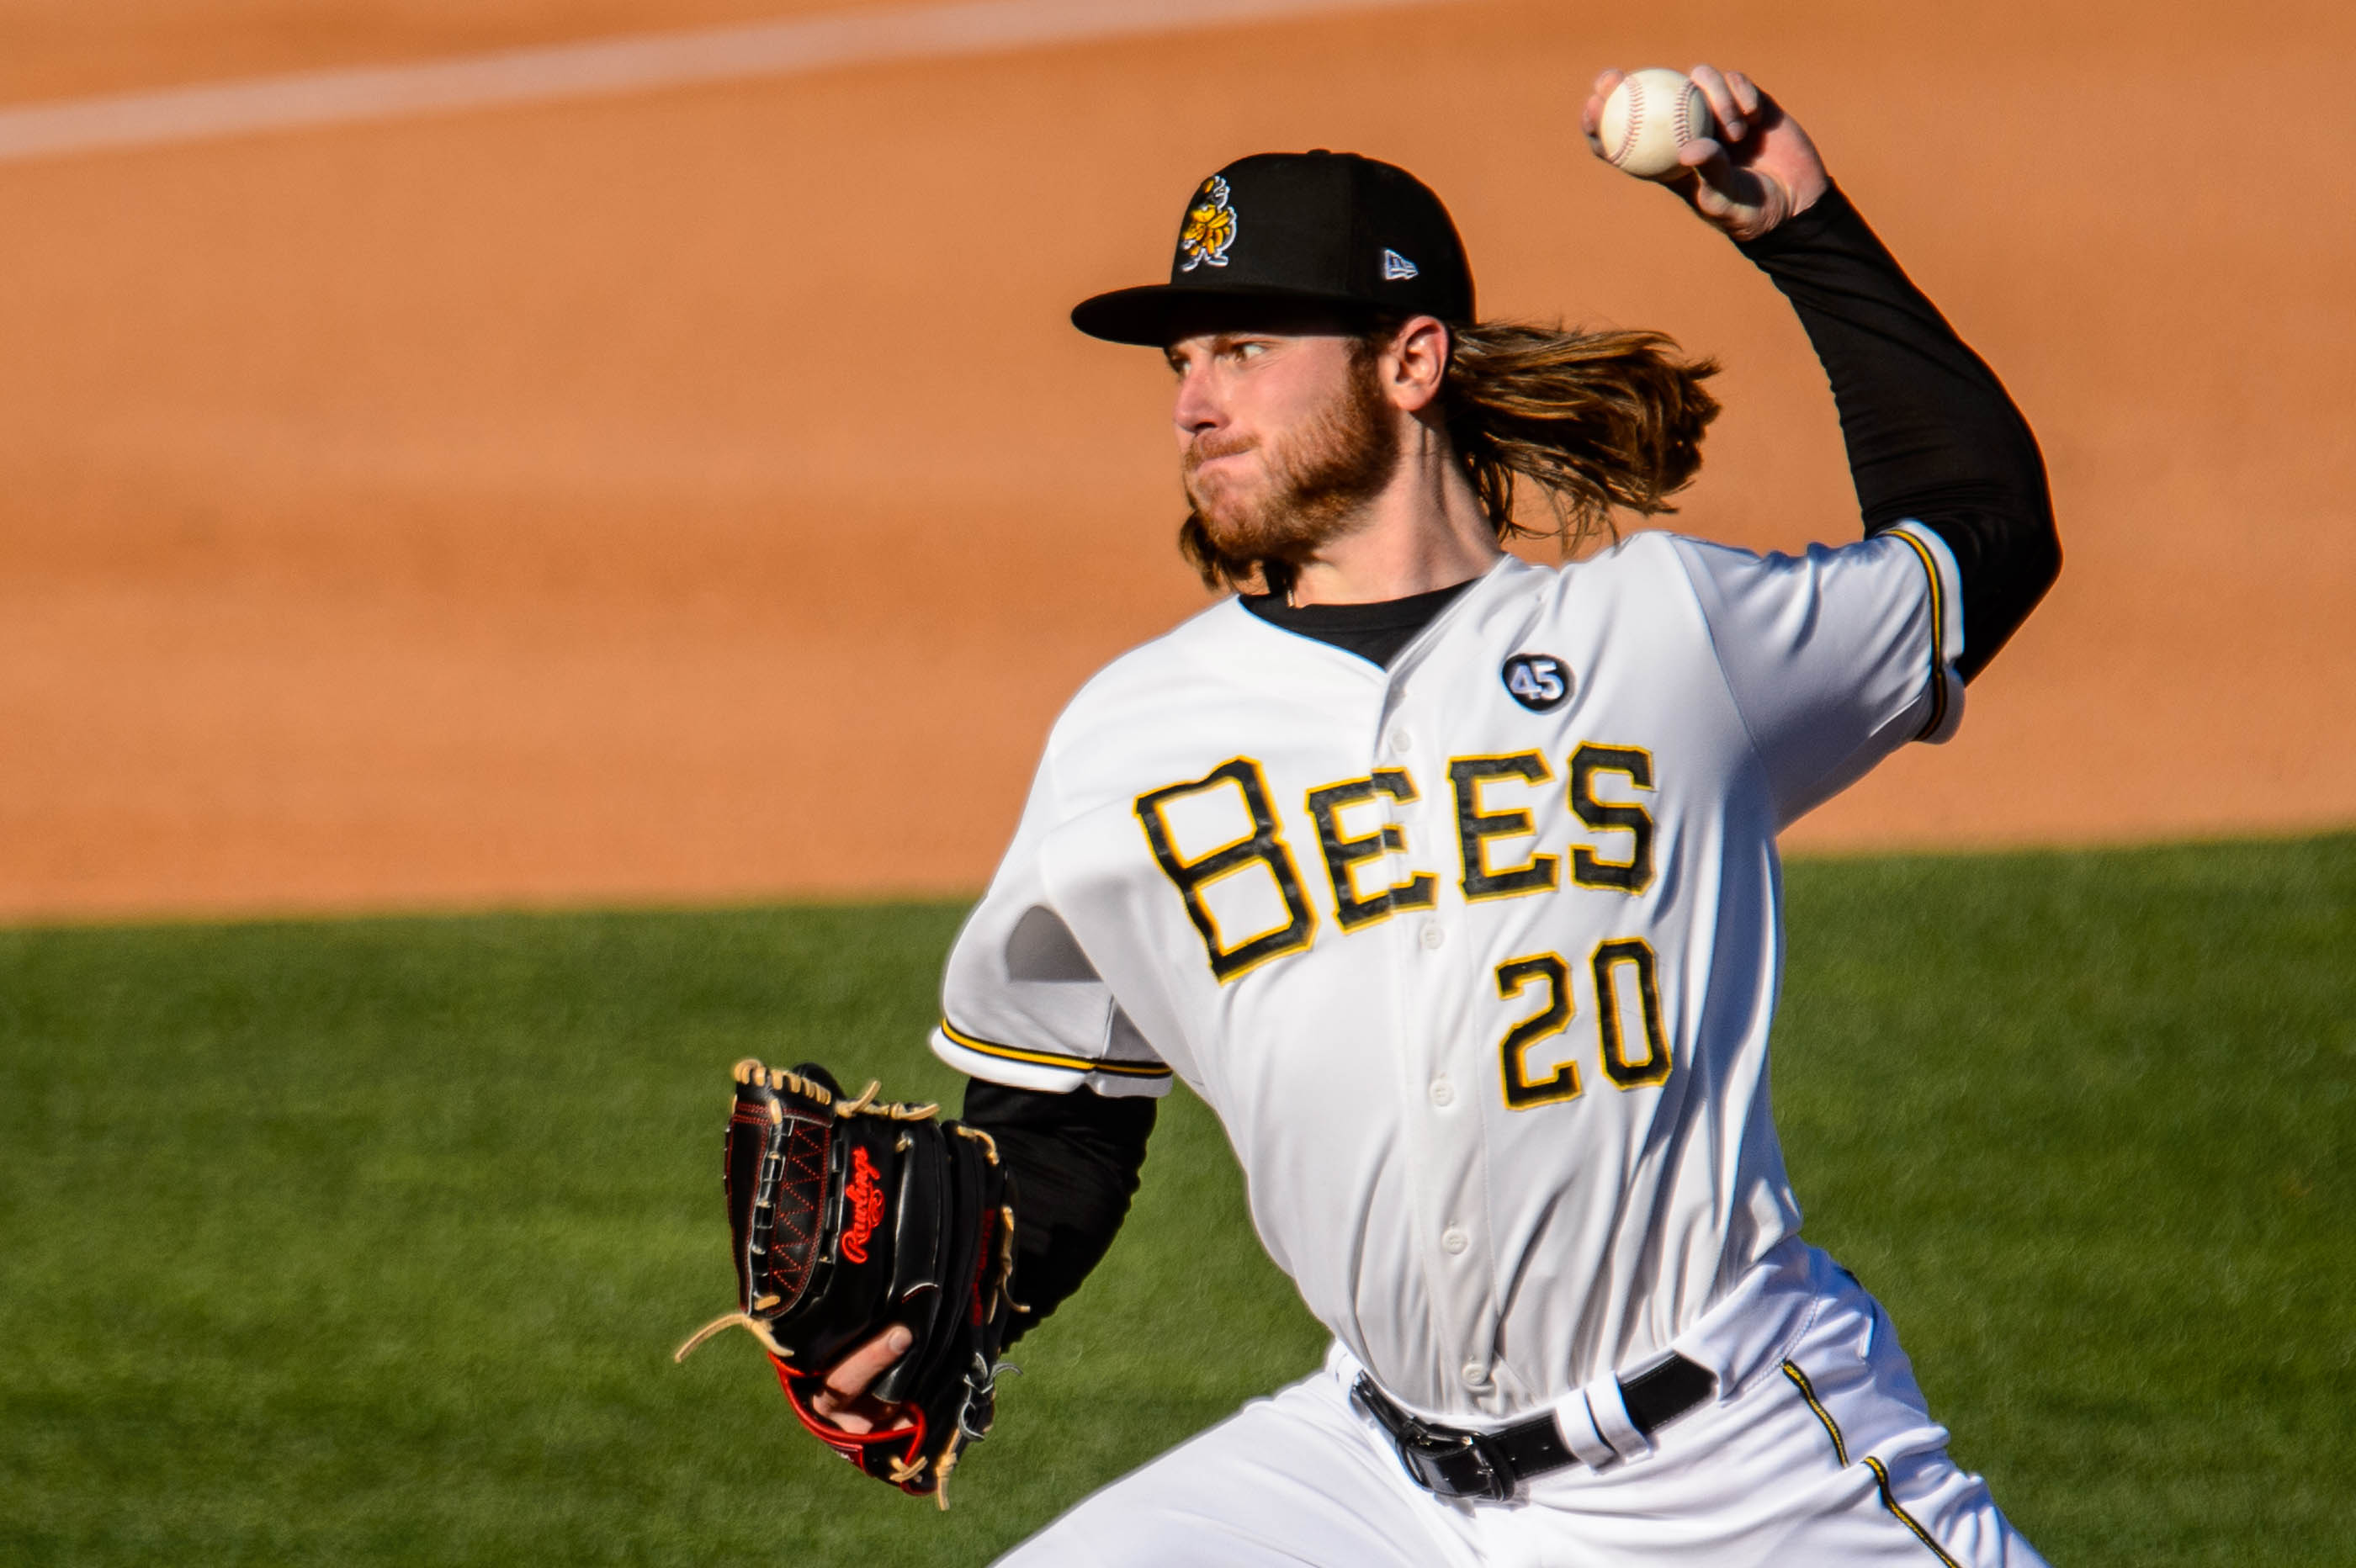 Salt Lake Bees will play ball starting April 8, according to schedule